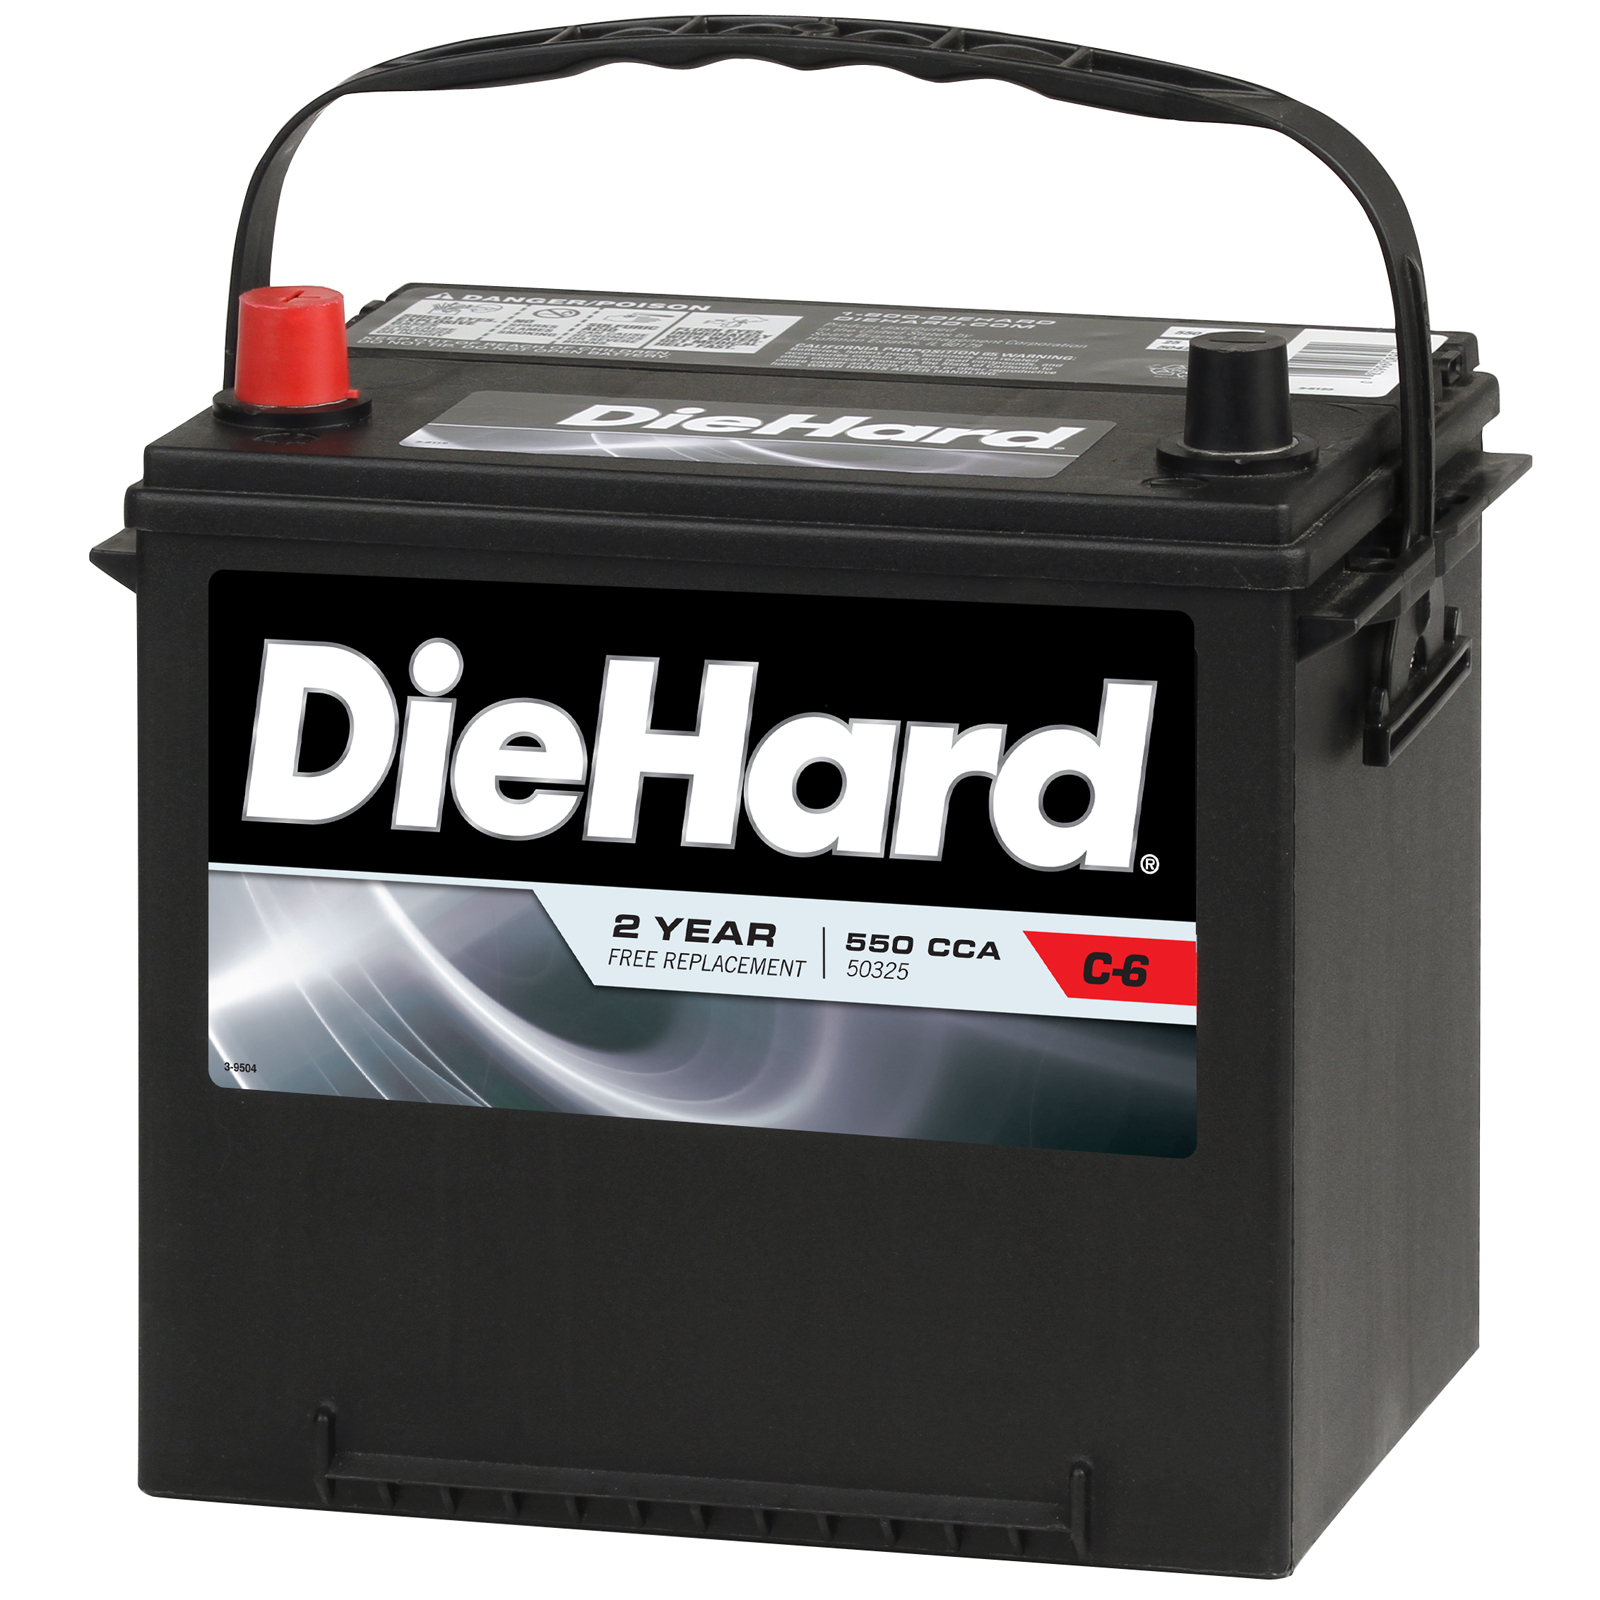 DieHard Automotive Battery - Group Size EP-25 (Price with Exchange